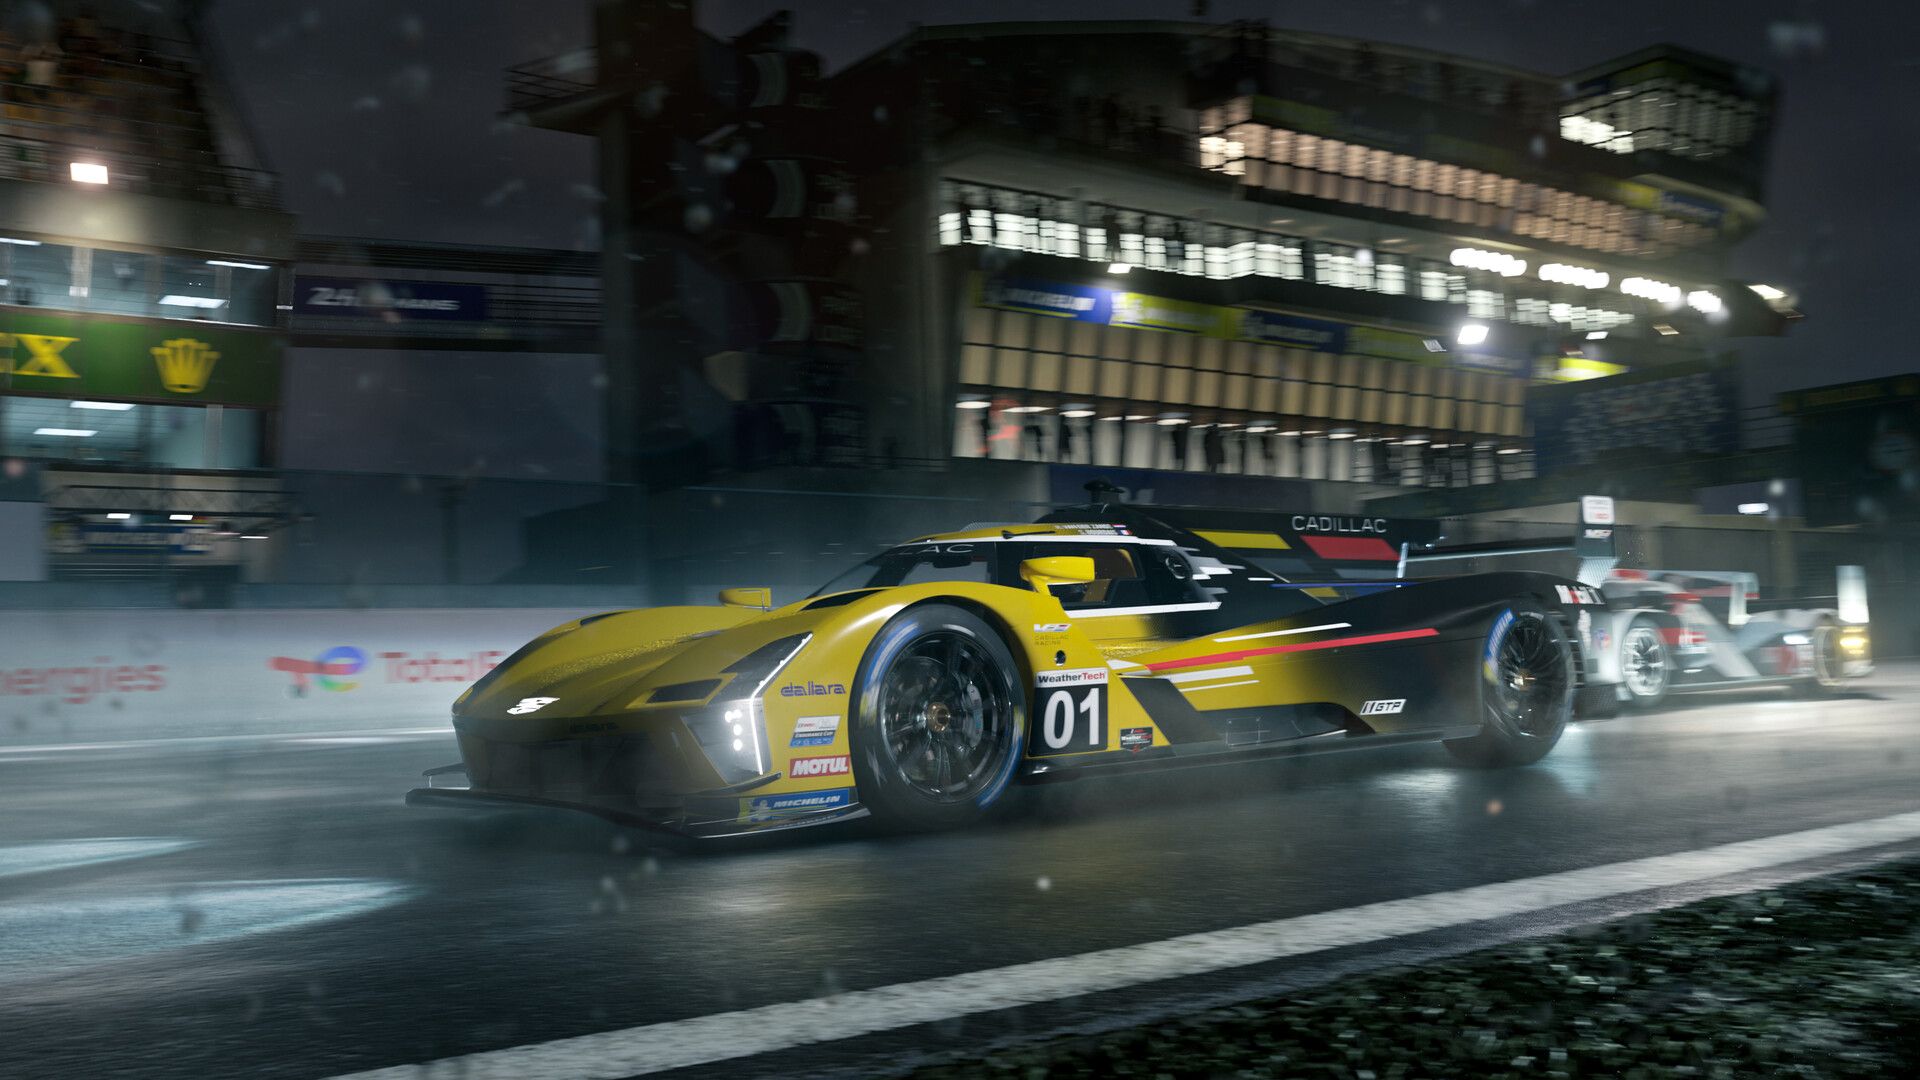 Forza Motorsport Positive Metacritic Score Inflated By Bots